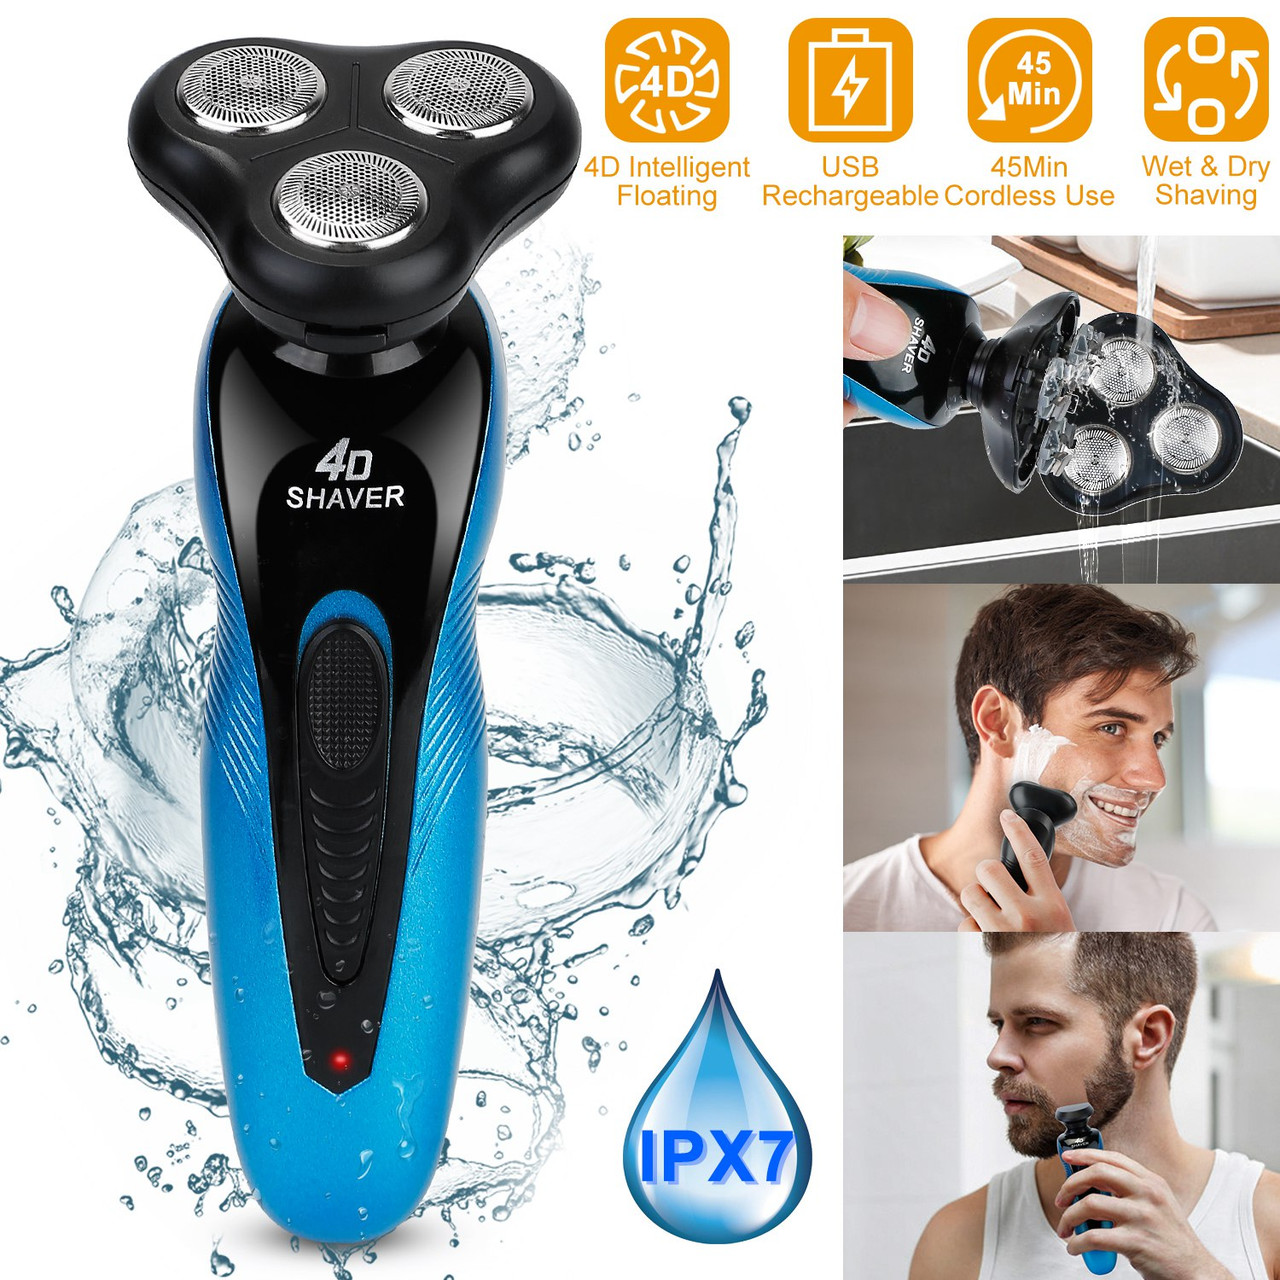 4-in-1 Electric Shaver, Beard Trimmer, Nose Trimmer & Facial Cleaner product image